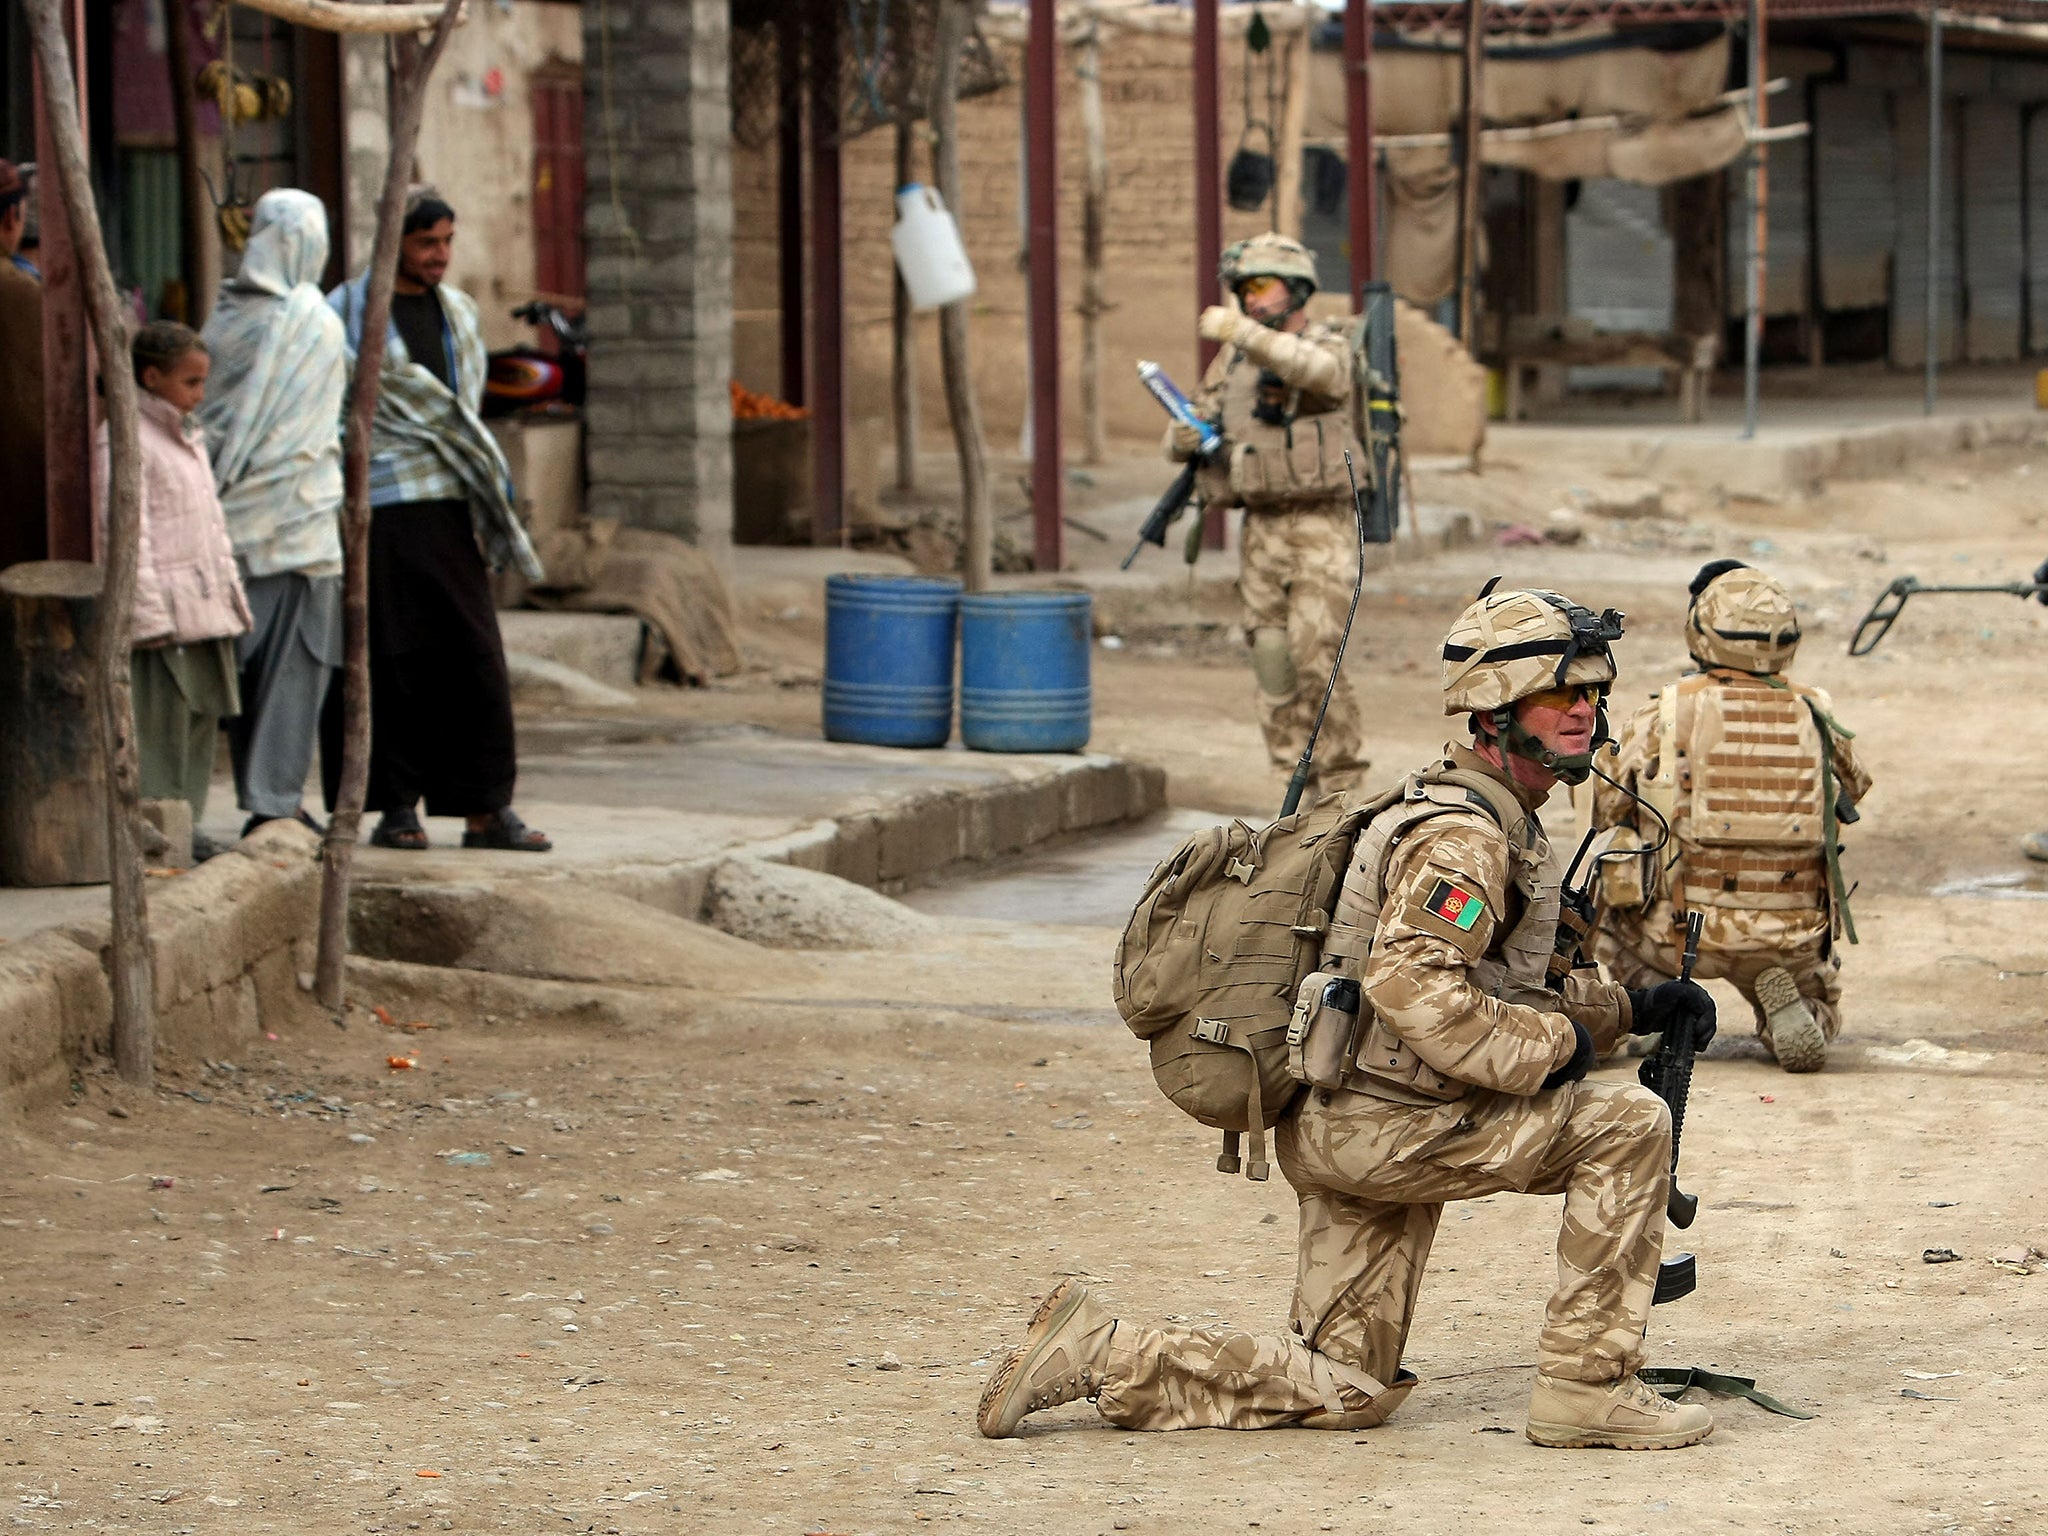 British soldiers of the 1st battalion Royal Welsh patrol in the streets in Helmand province in 2010